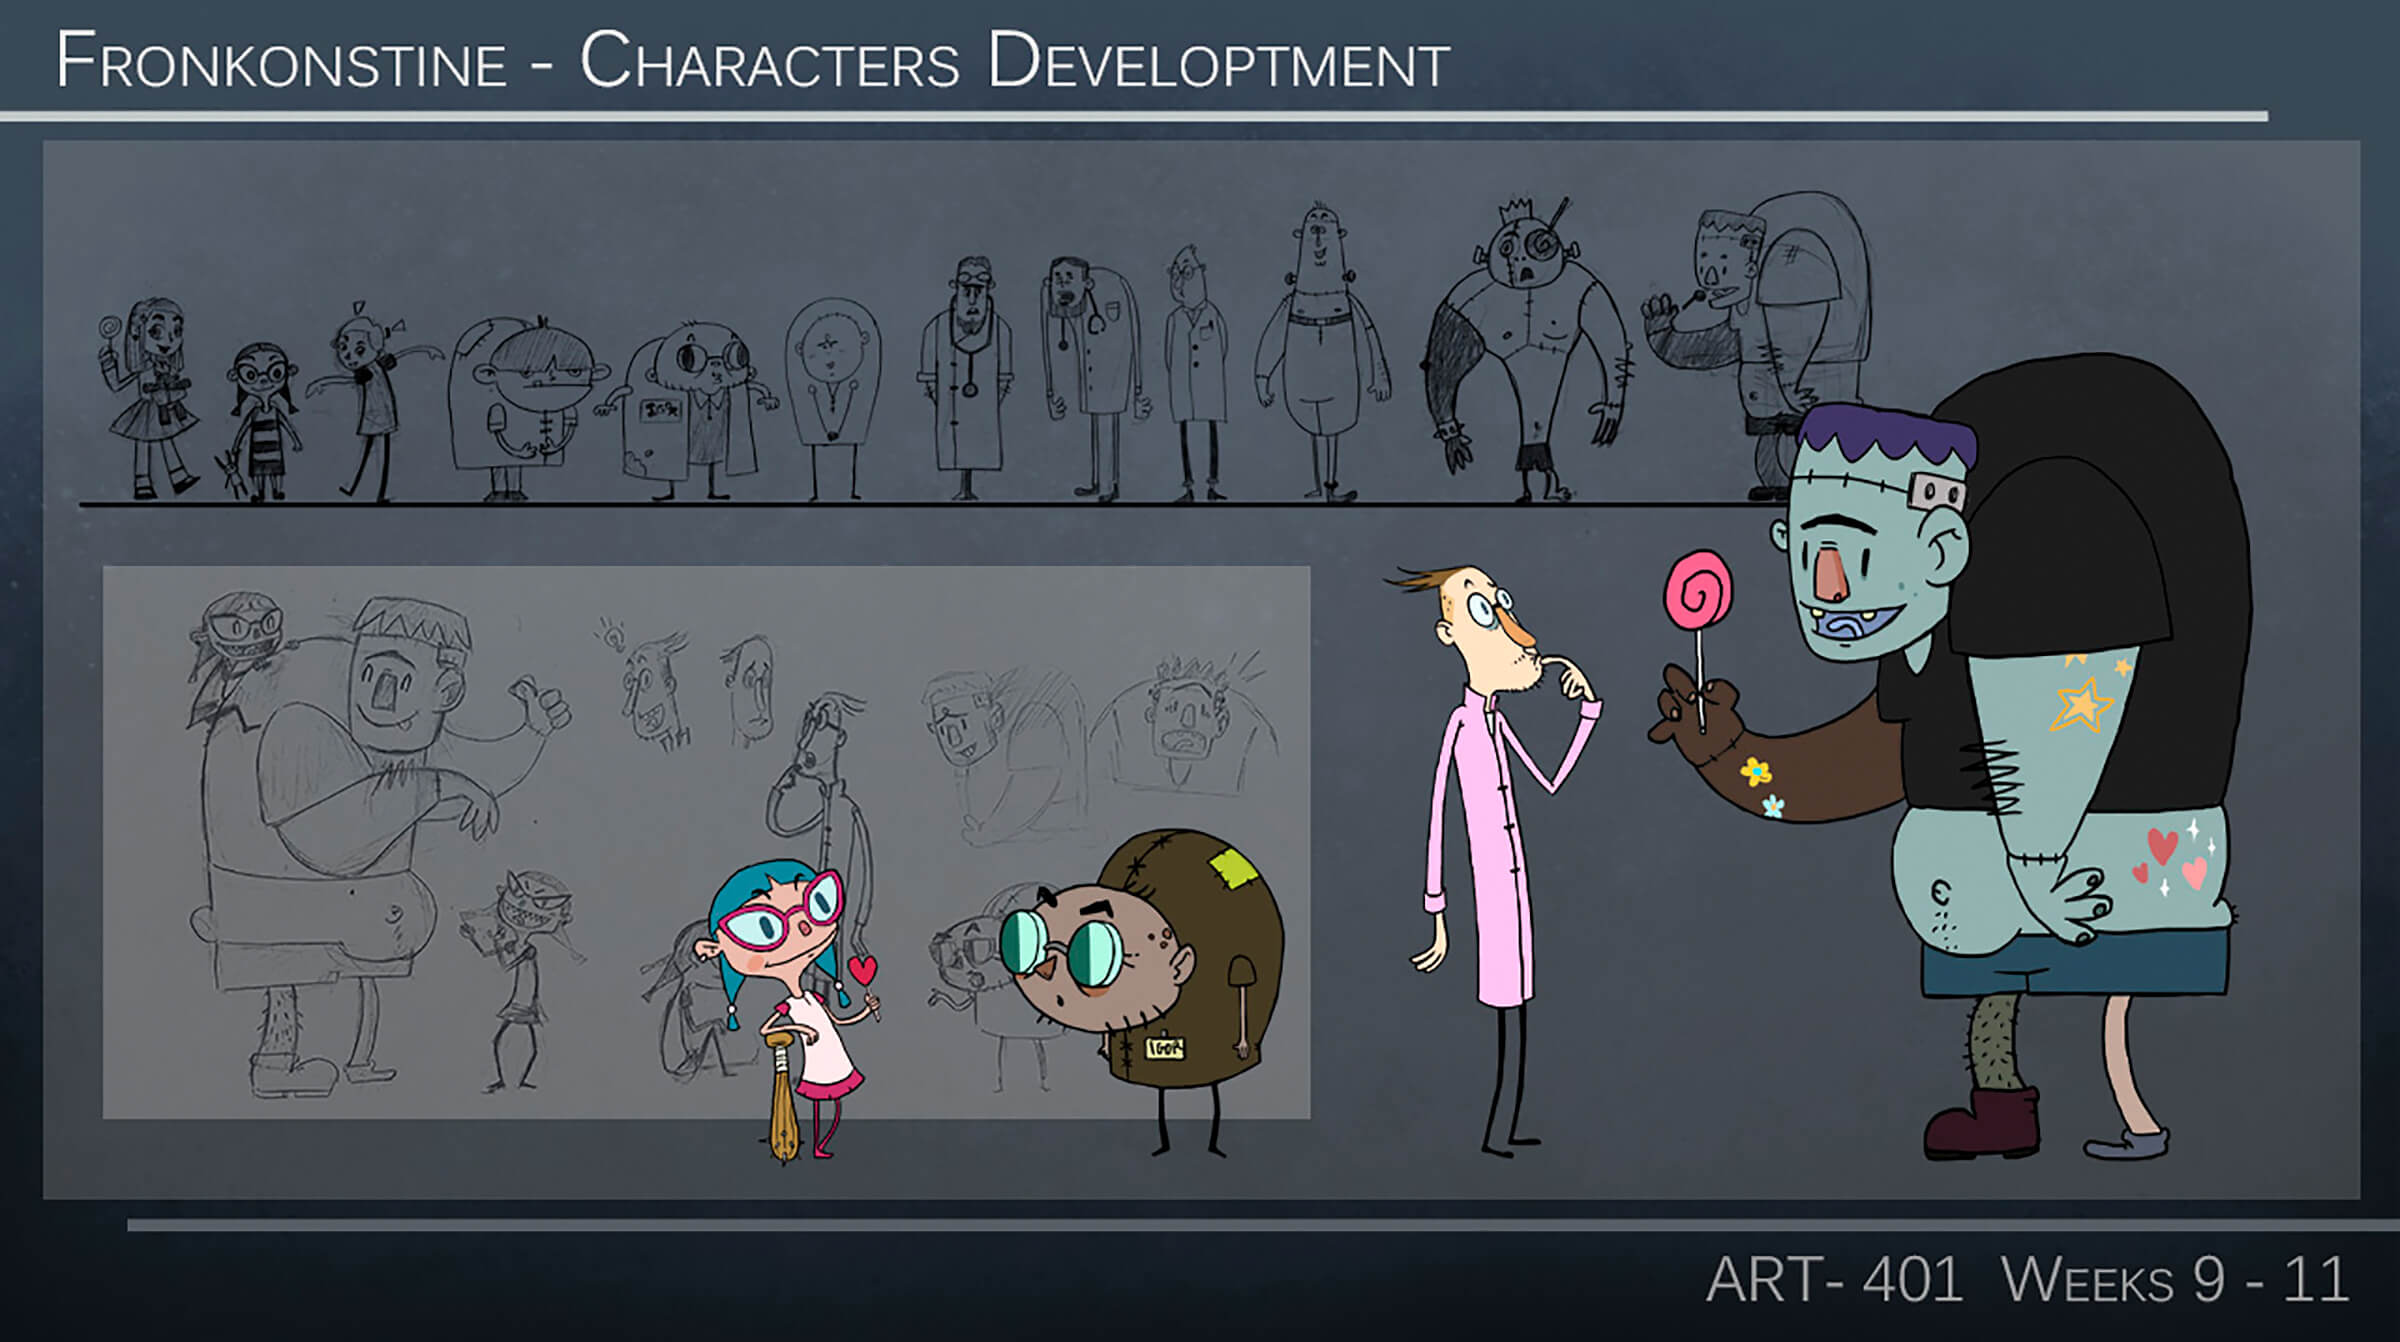 Concept sketches of a young girl, a scientist and his short assistant, and a friendly Frankenstein Monster holding a lollipop